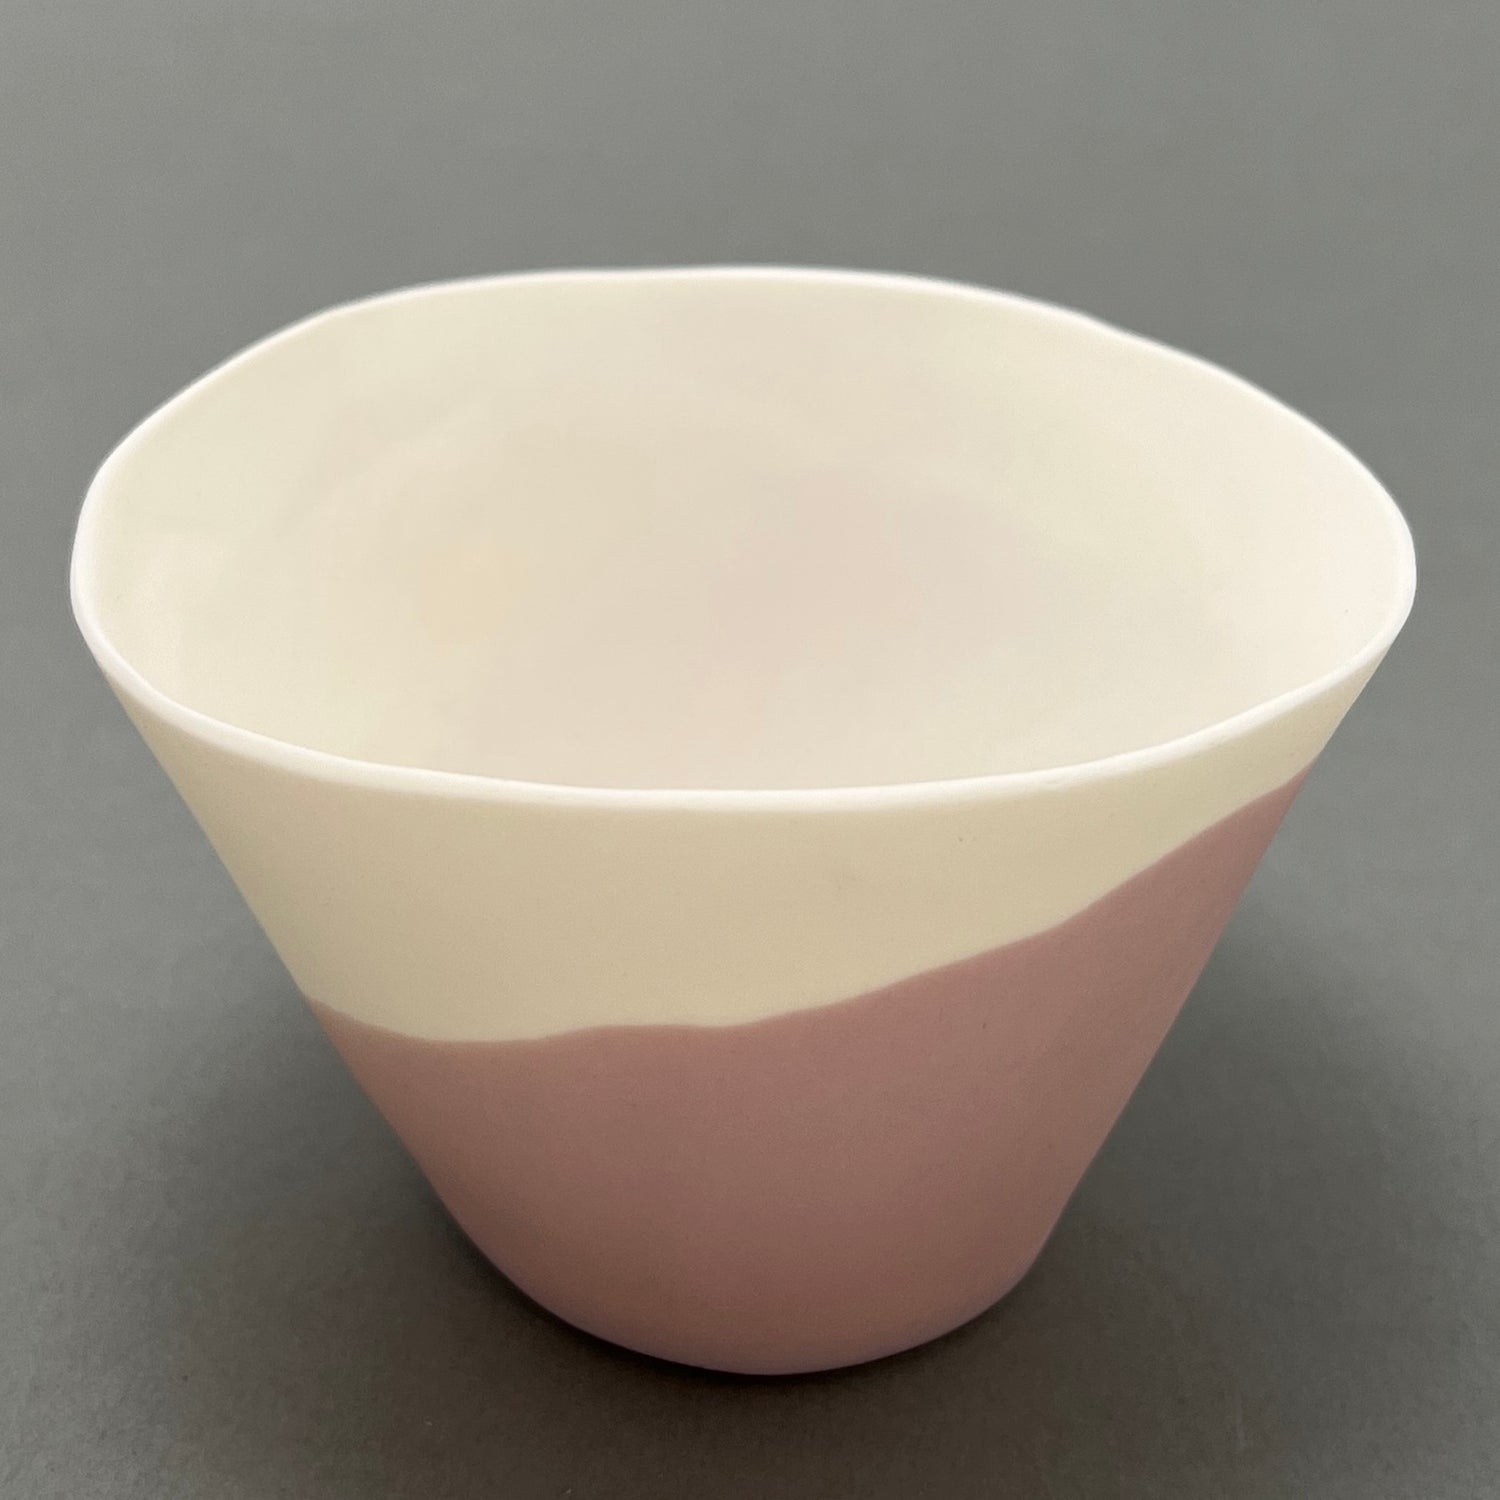 A white and pink coloured porcelain bowl standing on a gray background